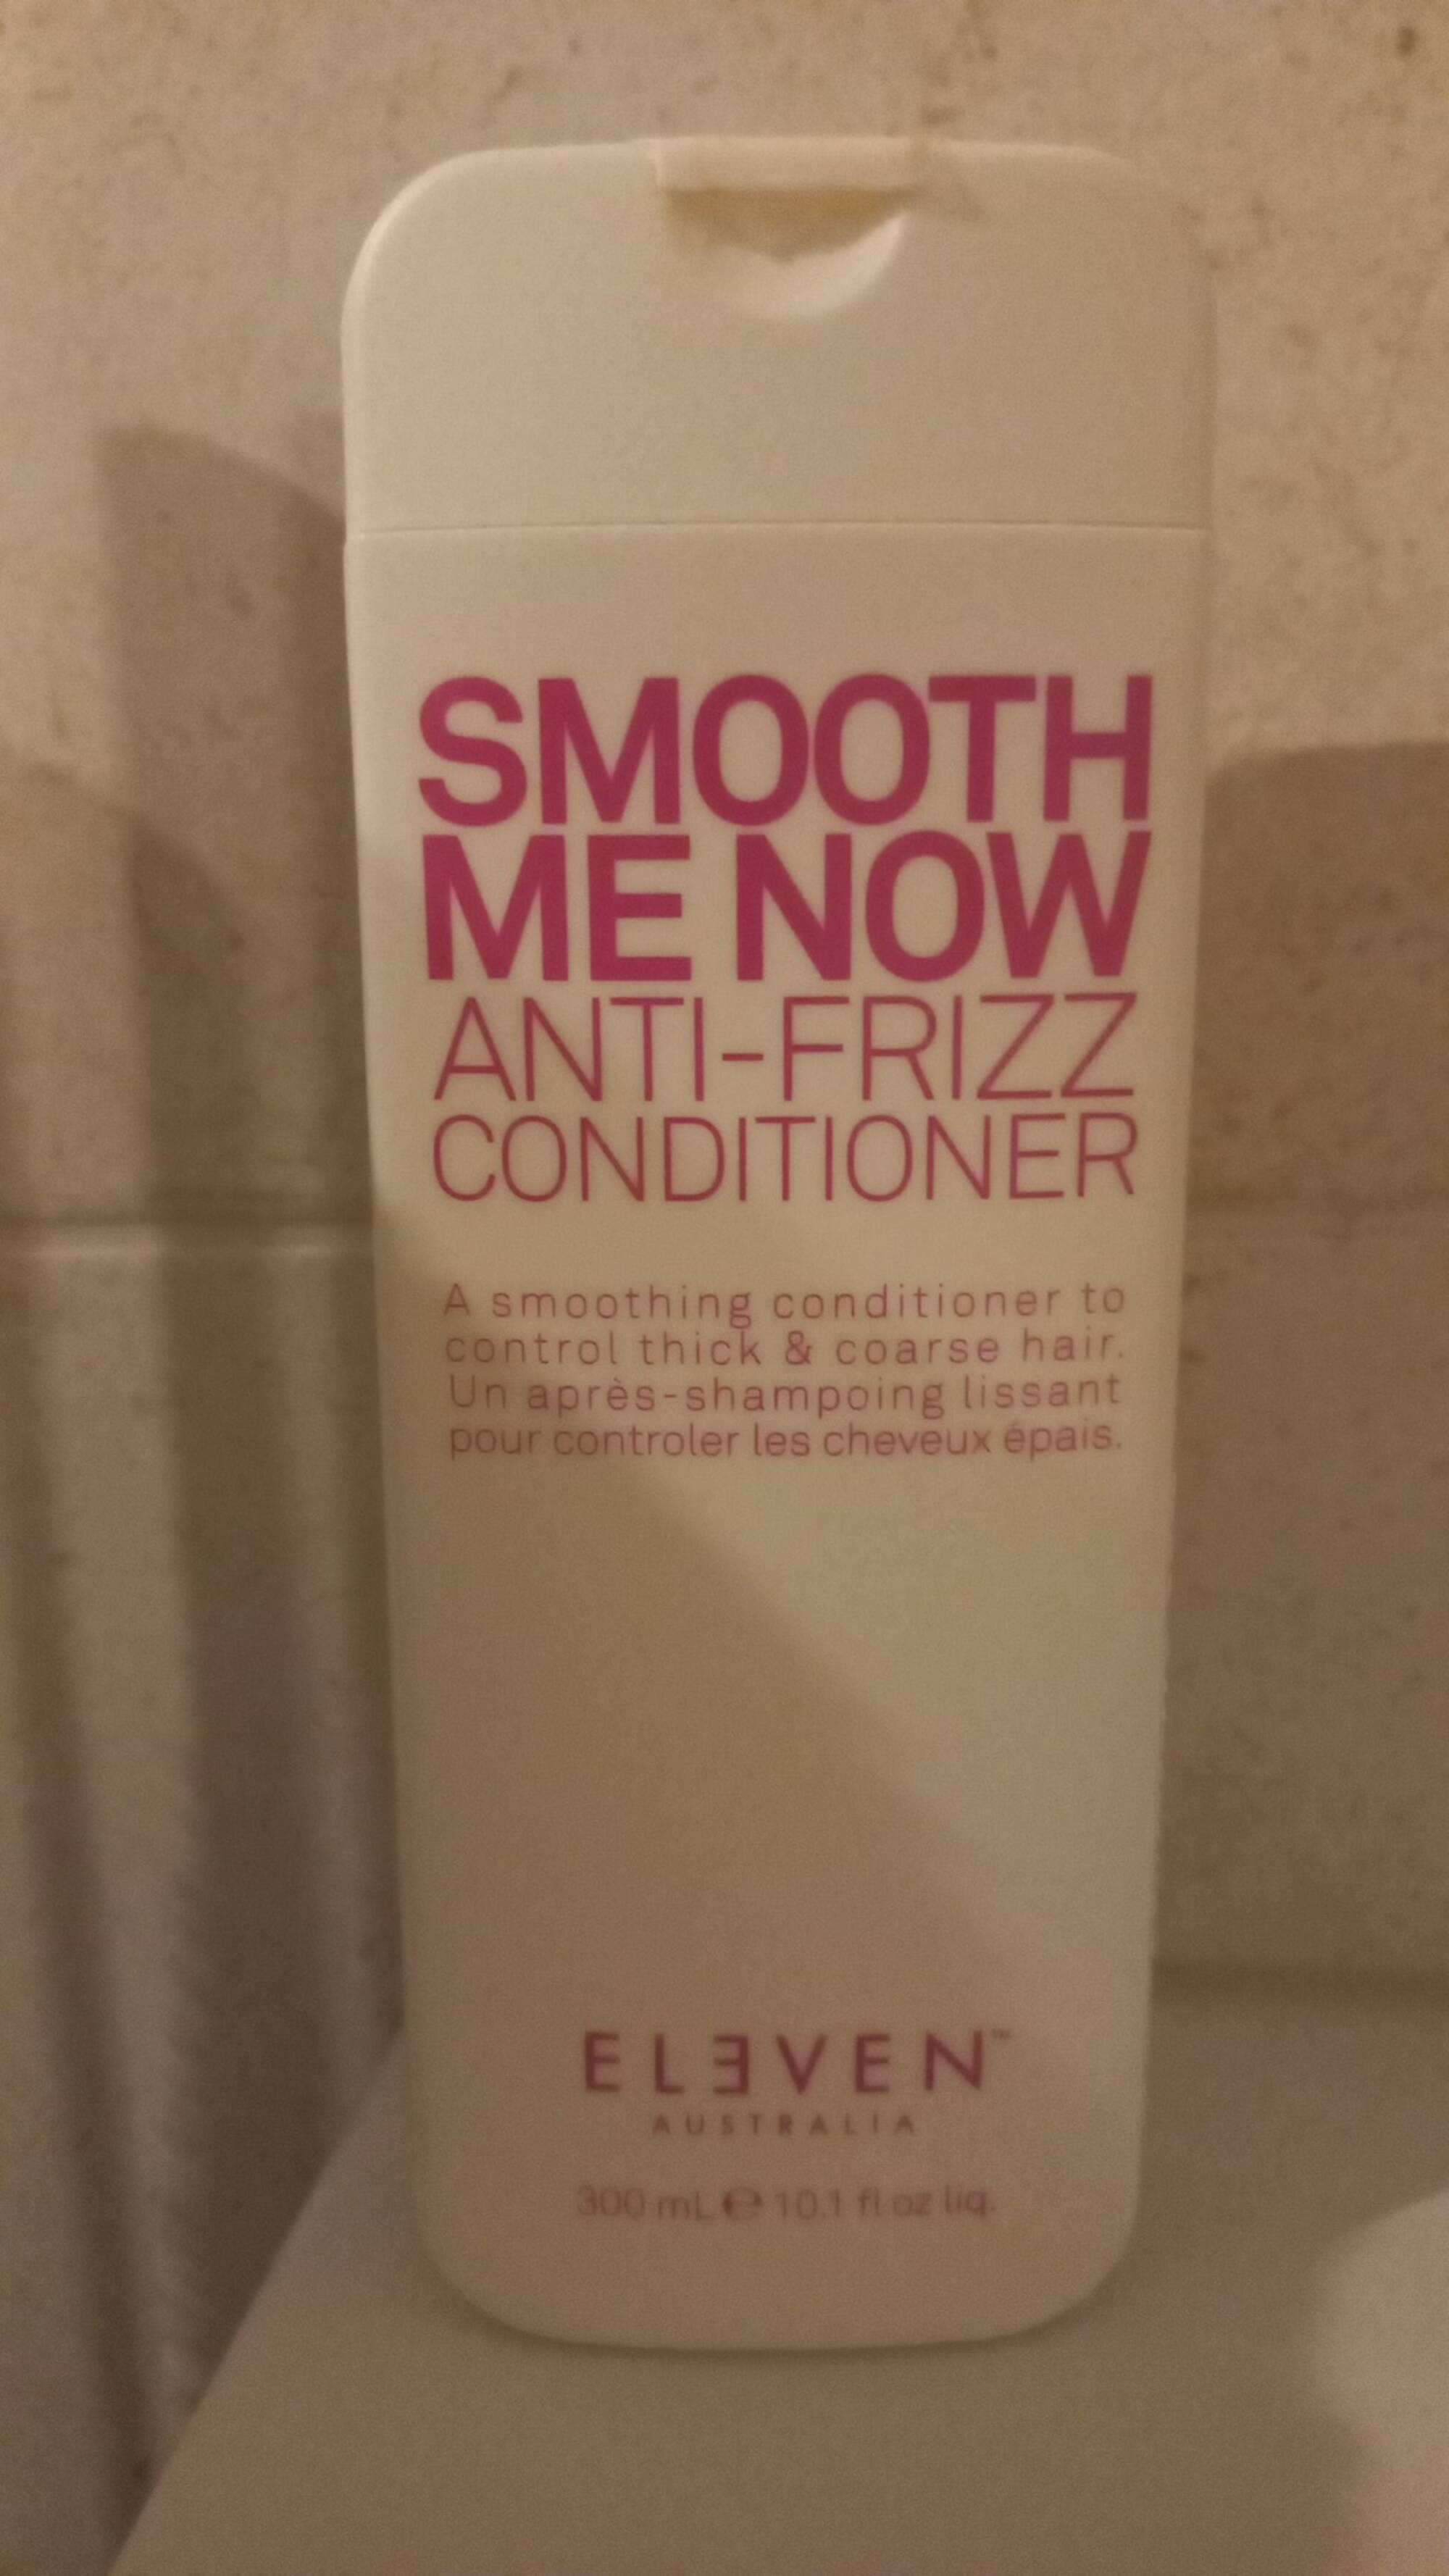 ELEVEN - Smooth me now - Anti-frizz conditioner